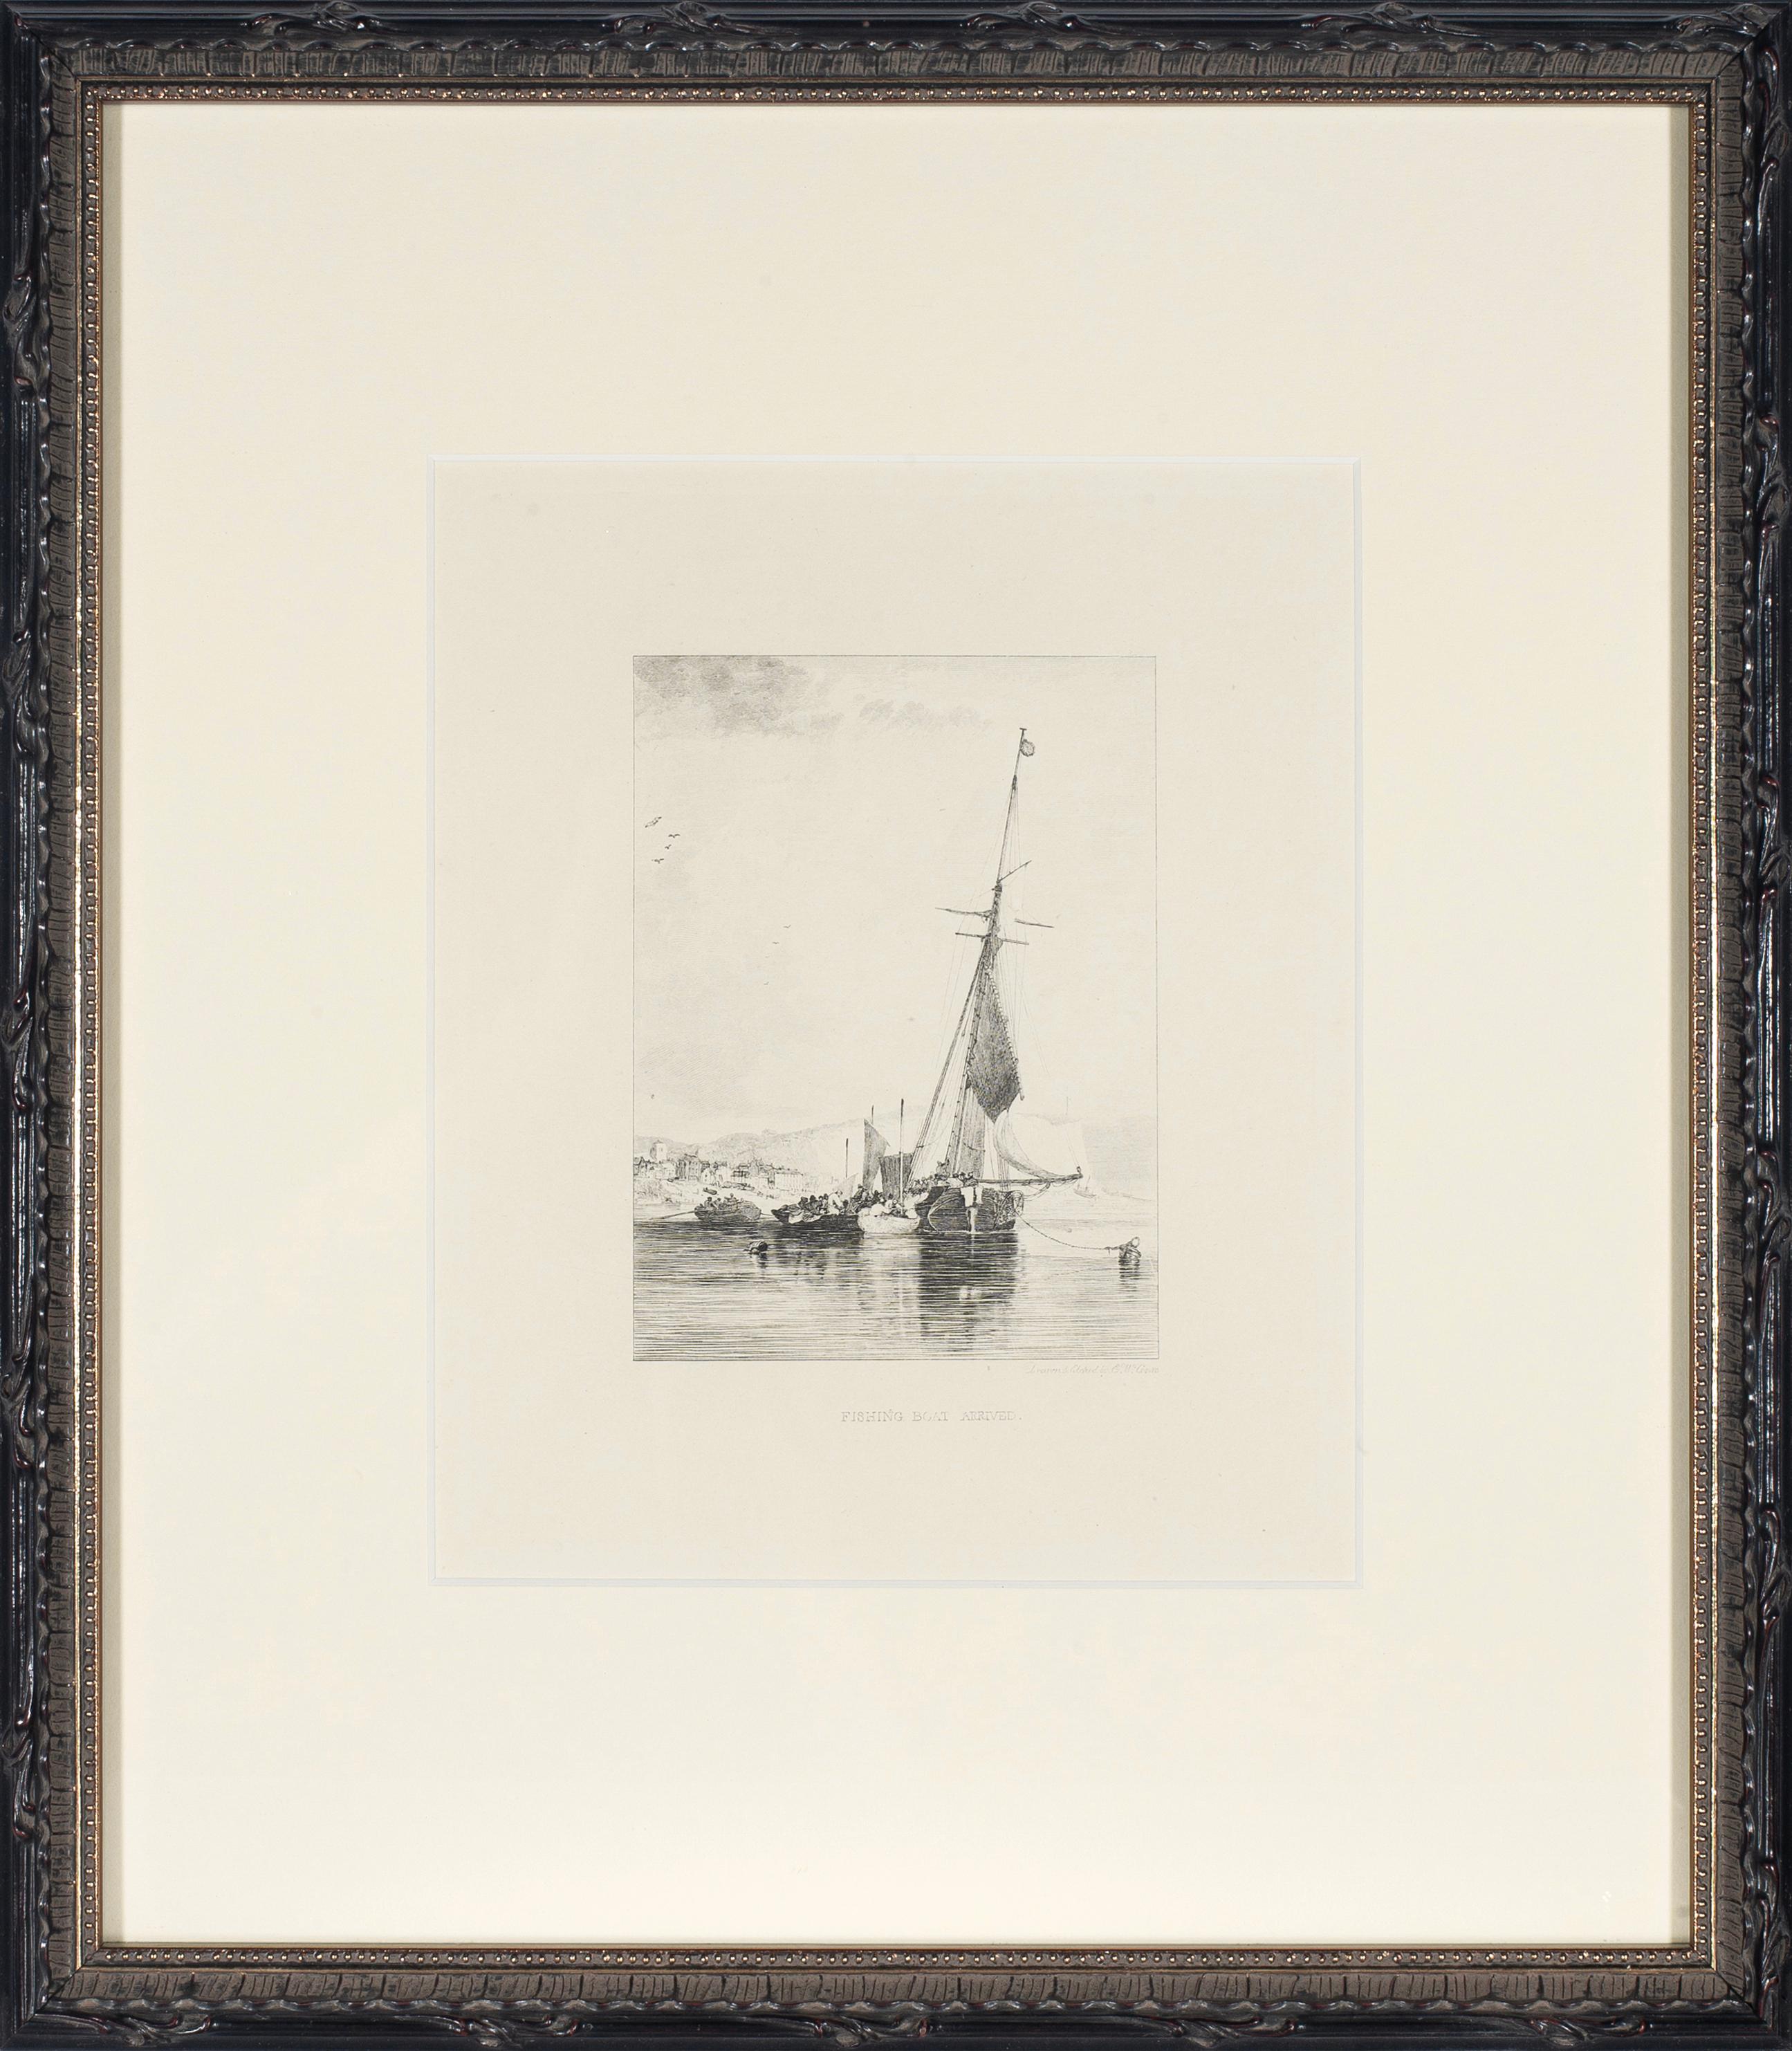 02: Fishing Boat Arrived - Print by E. W. Cooke